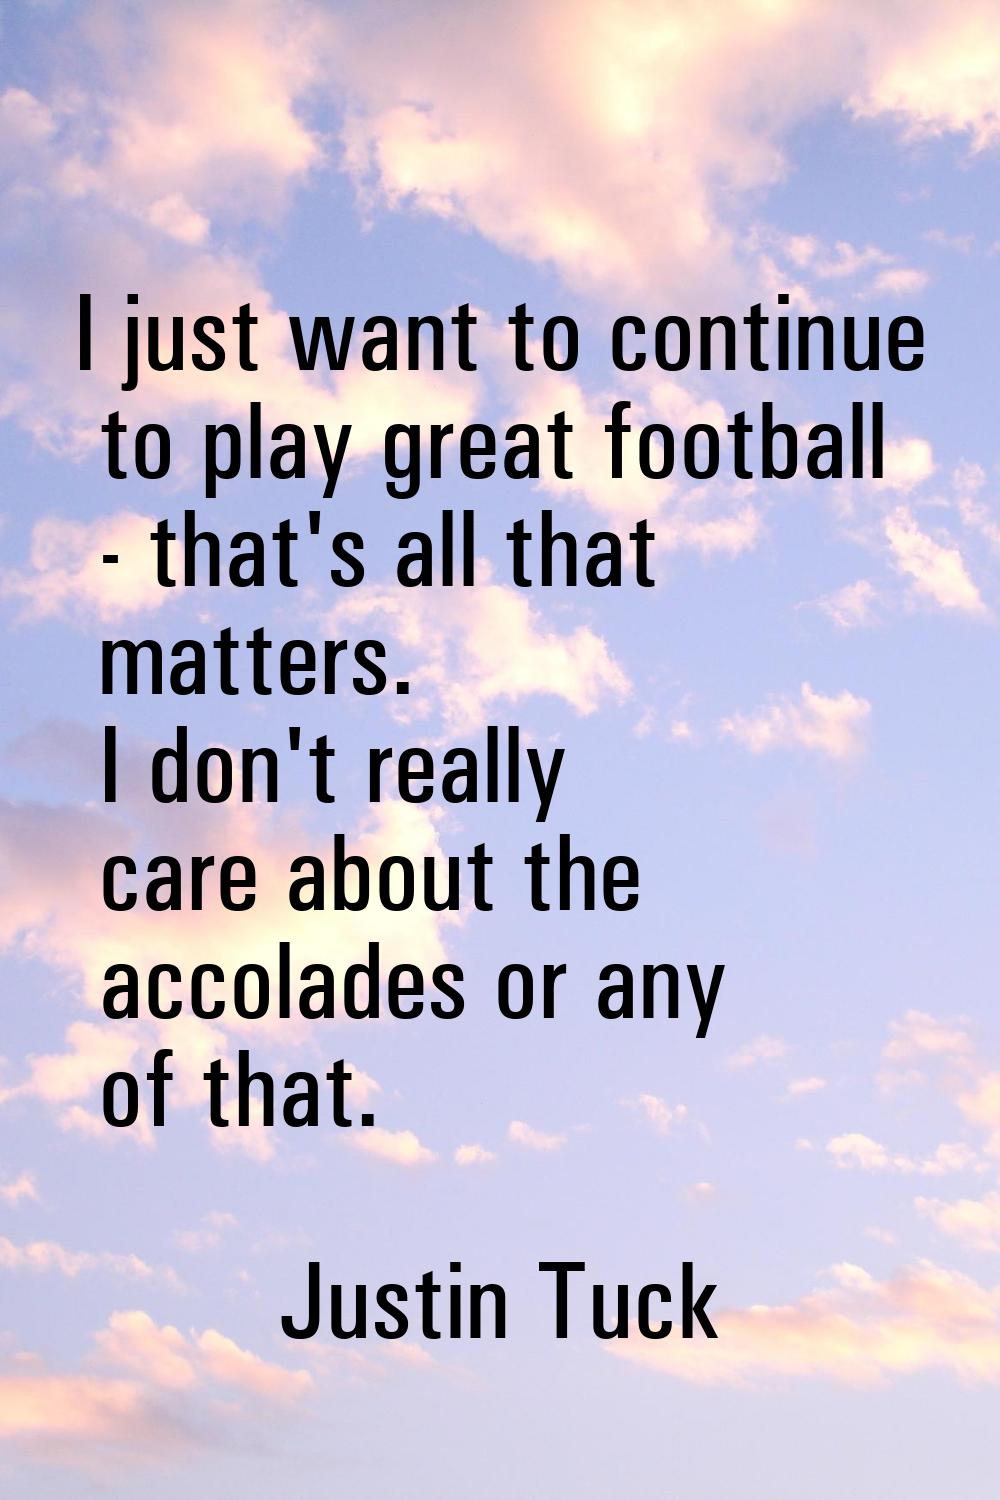 I just want to continue to play great football - that's all that matters. I don't really care about